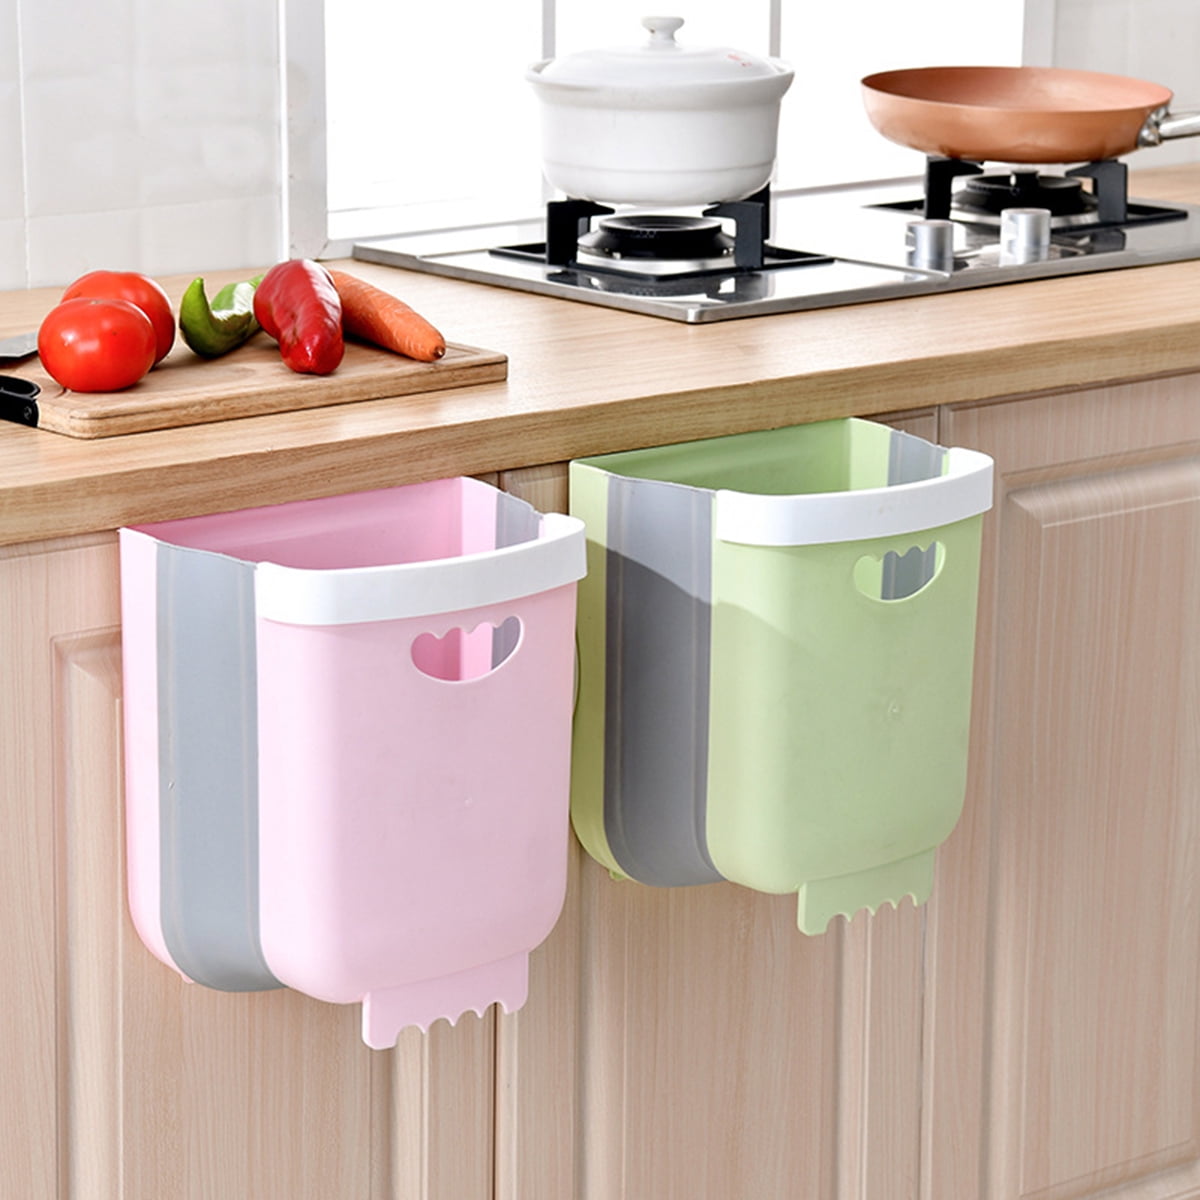 Hanging Trash Can Kitchen Waste Bin Cabinet Collapsible Mini Garbage Cans for Car Bathroom Office Bedroom Camping 